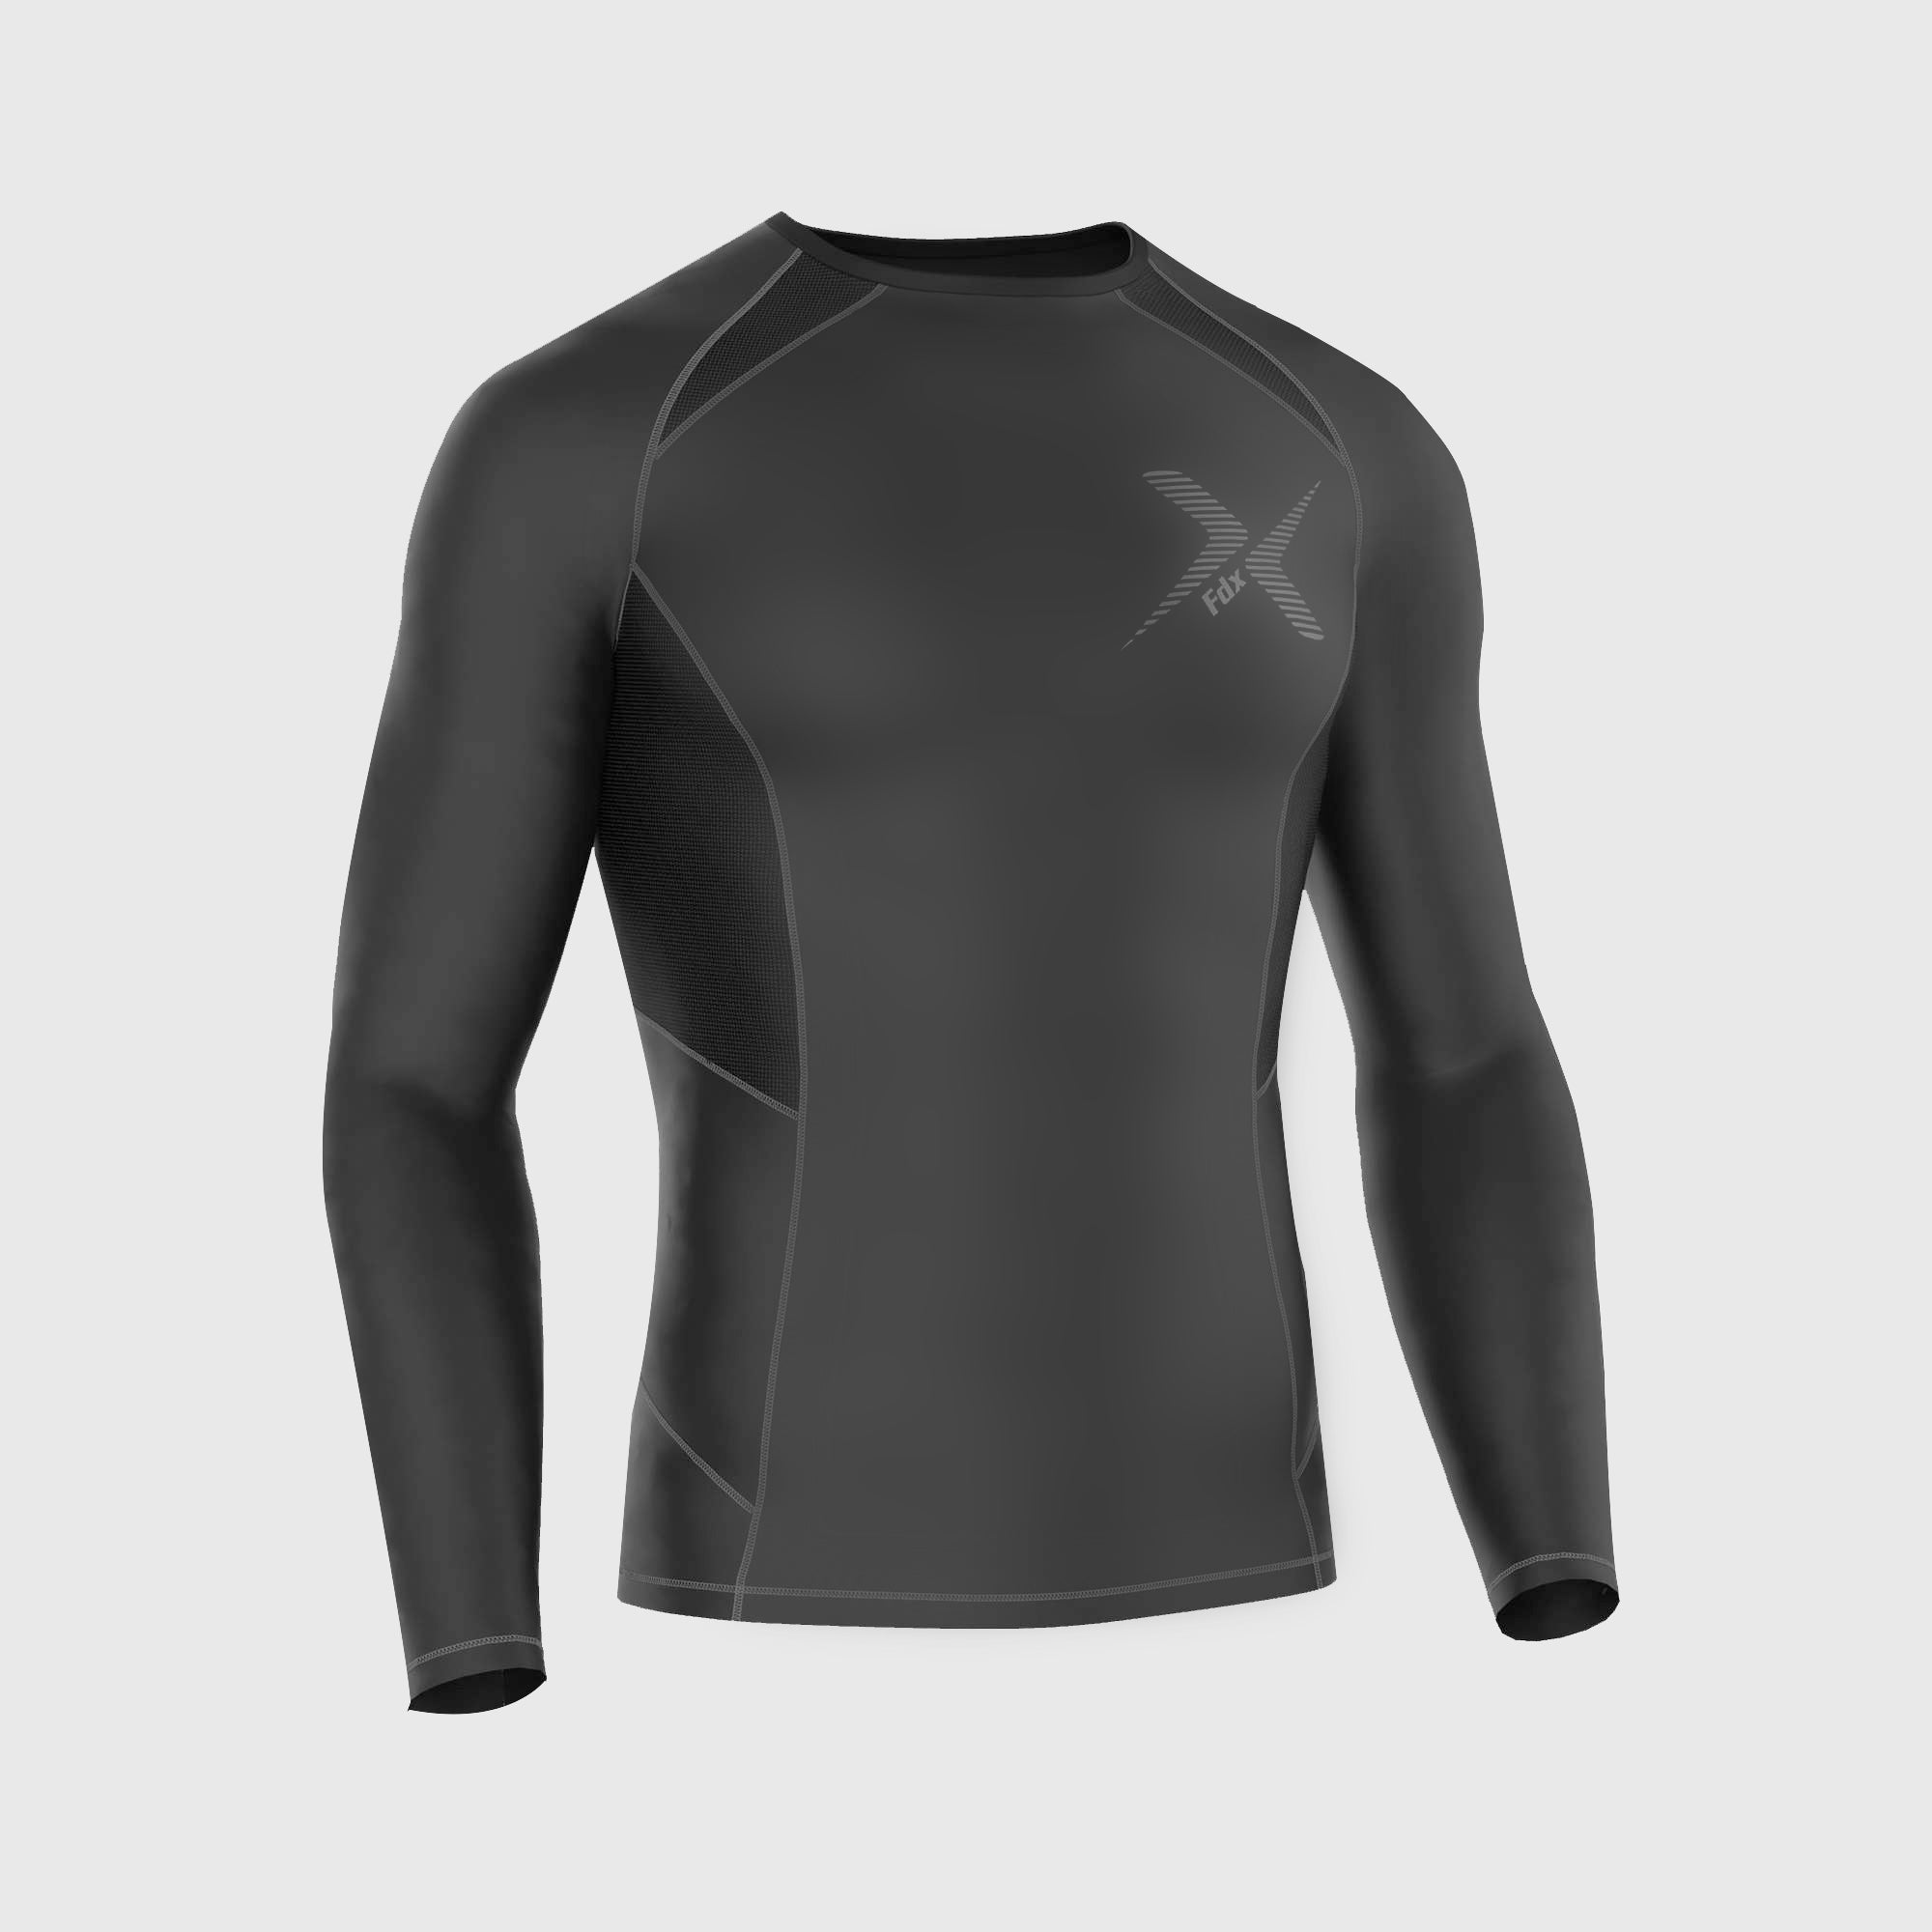 Fdx Mens Black & Grey Long Sleeve Compression Top & Compression Tights Base Layer Gym Training Jogging Yoga Fitness Body Wear - Recoil